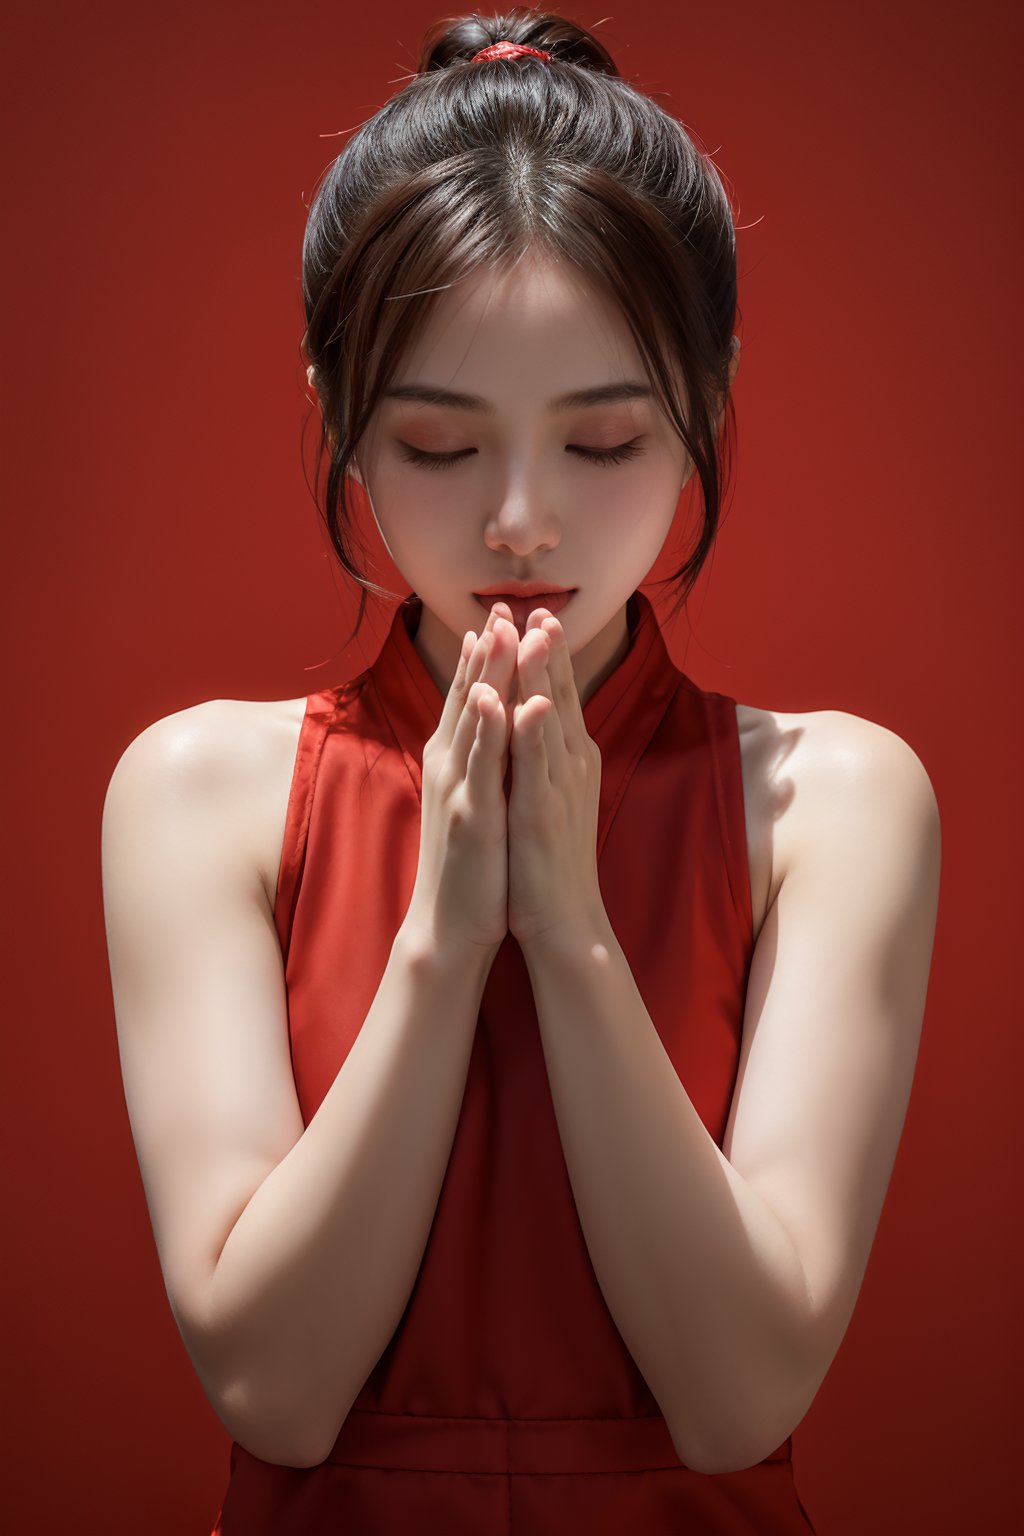 A Chinese ancient beauty is praying, with hands clasped together, eyes closed in silence, wearing a solemn yet beautiful expression, Red Background, poakl